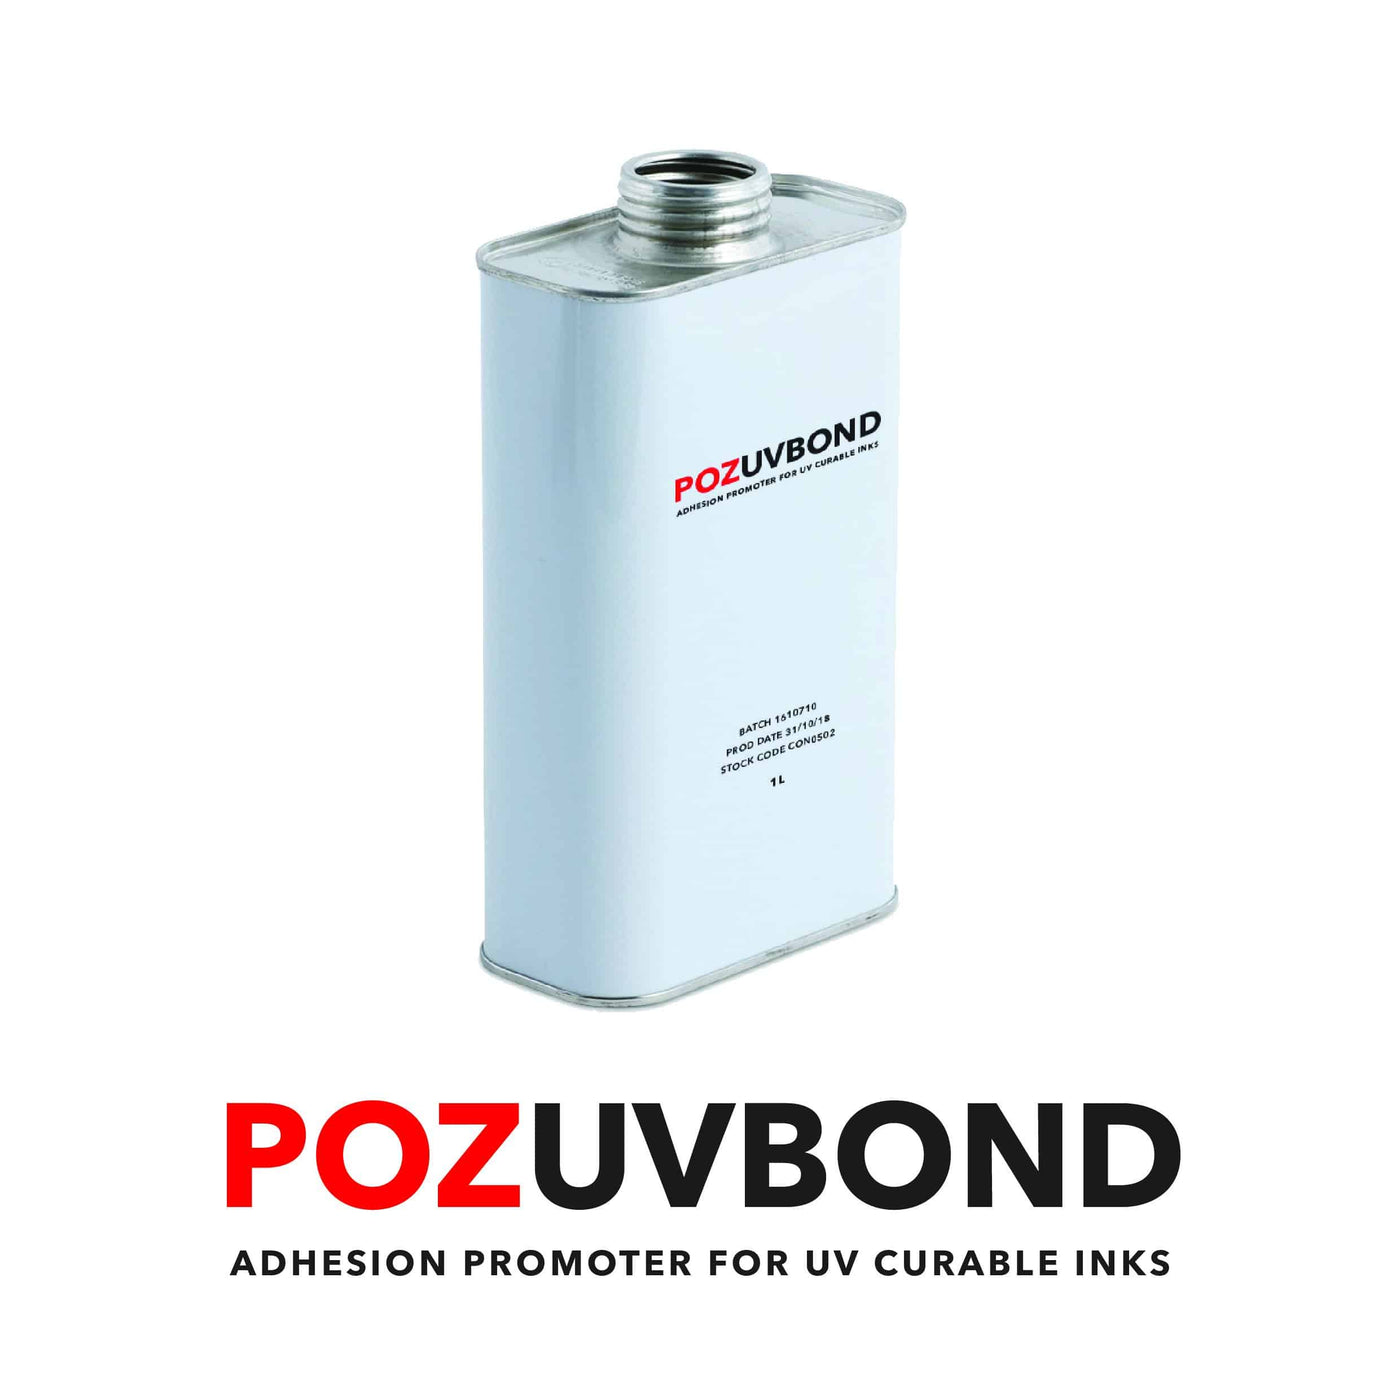 Poz UV Bond | Adhesion promoter for UV curable inks 1L